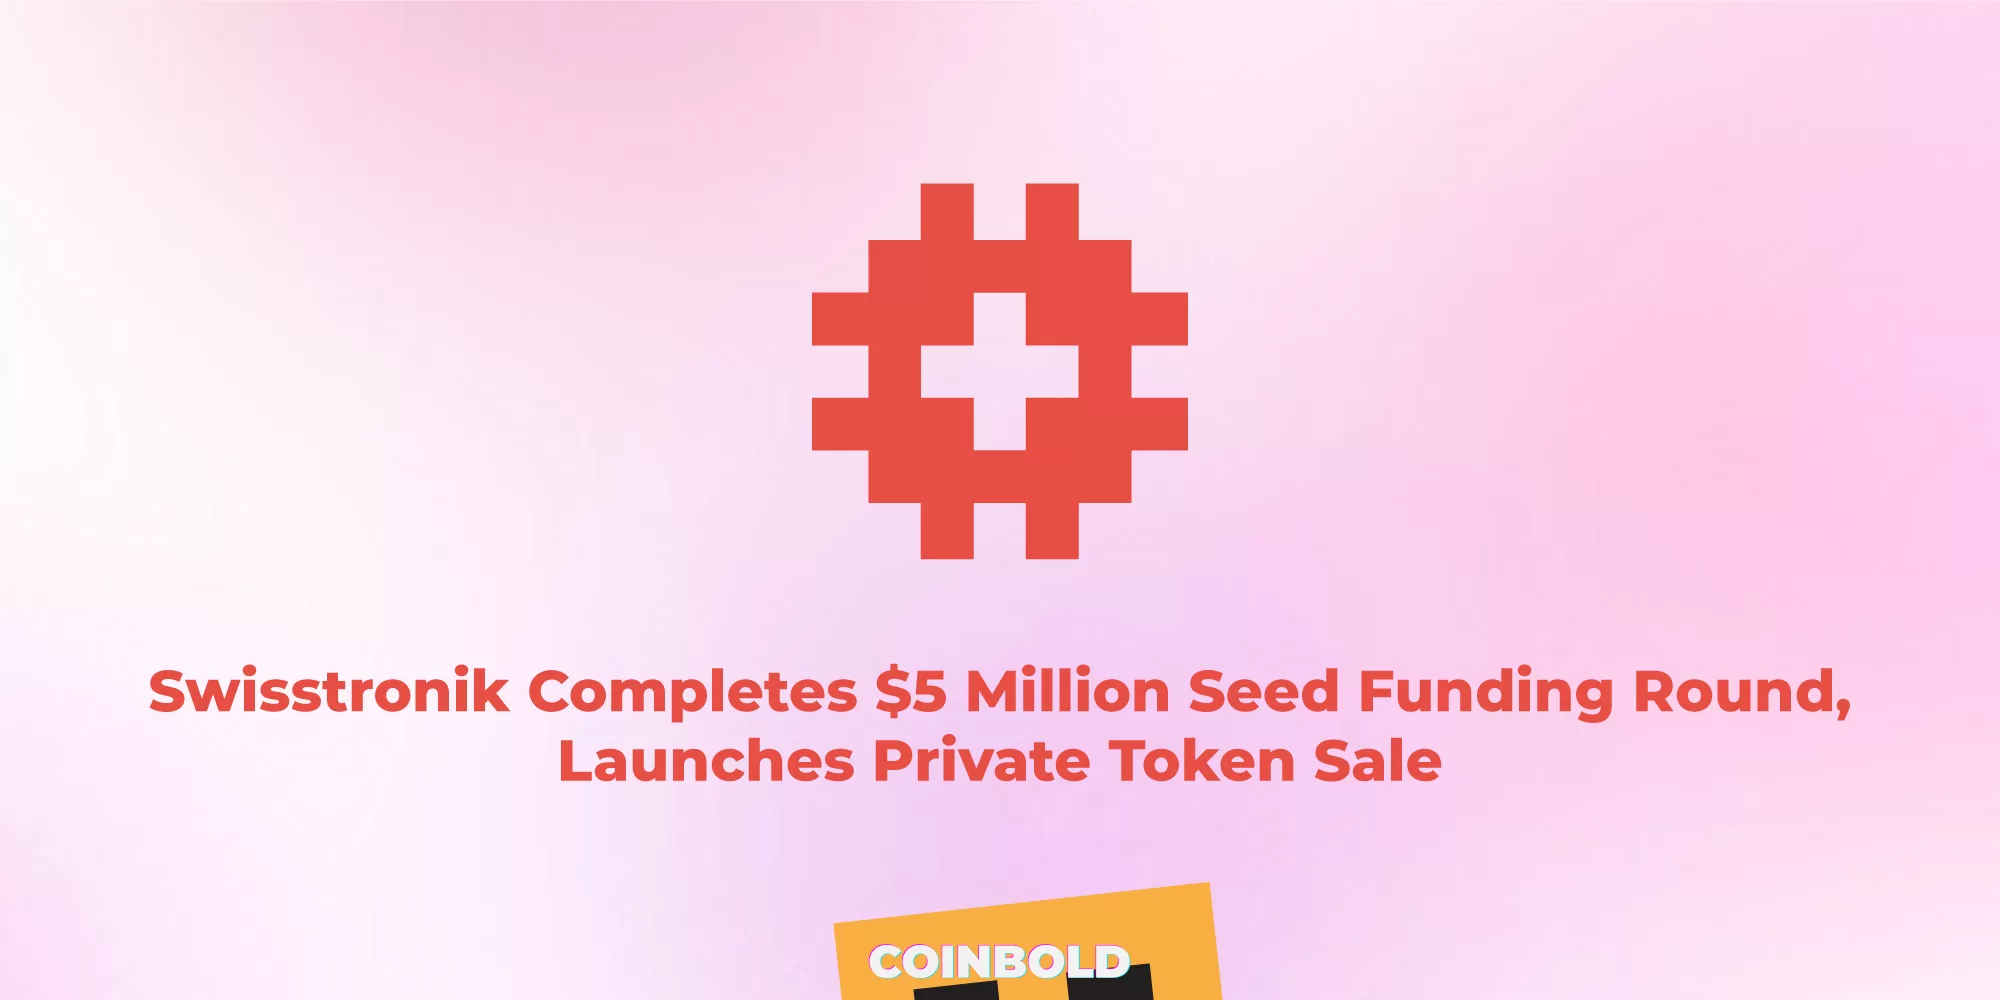 Swisstronik Completes $5 Million Seed Funding Round, Launches Private Token Sale